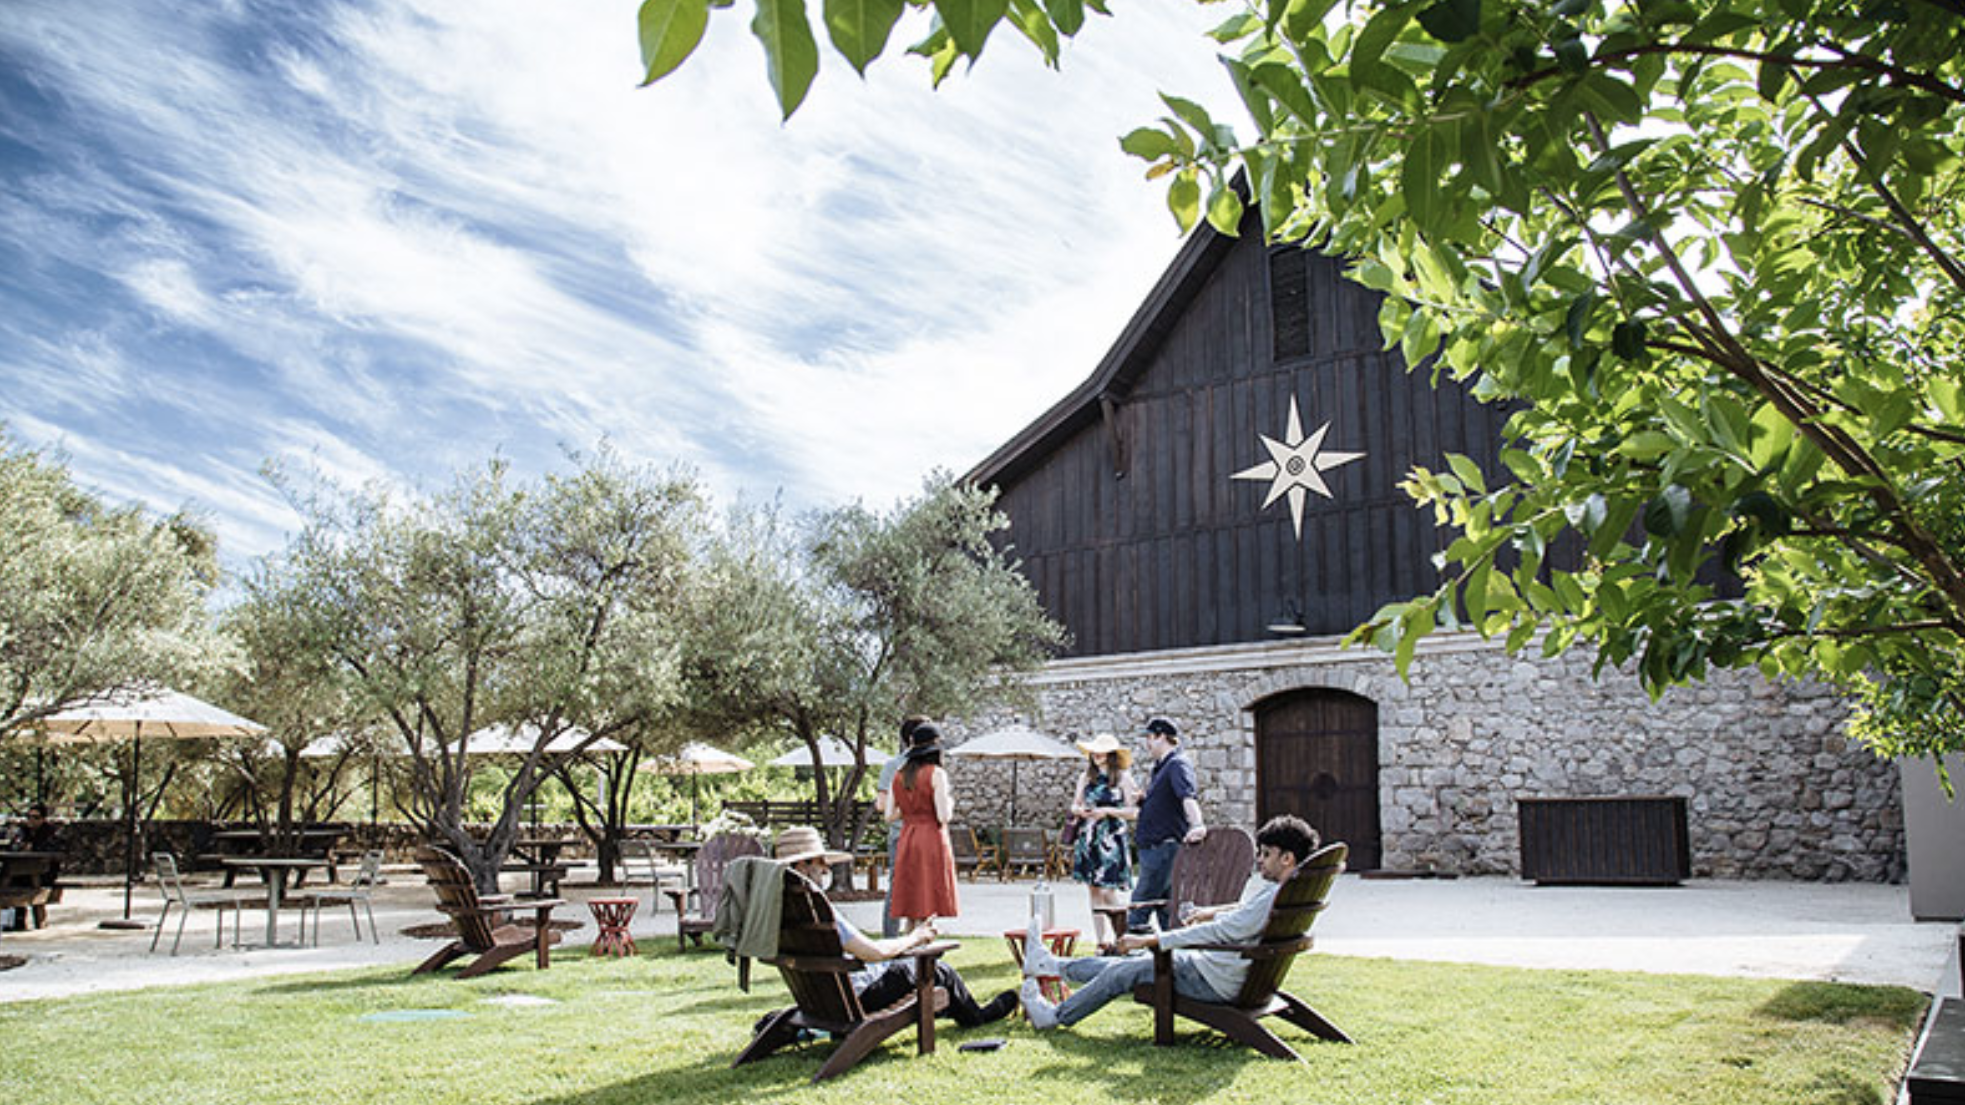 Individuals relish the warmth of the sun at open-air seating adjacent to an expansive, charming barn adorned with a star accent.